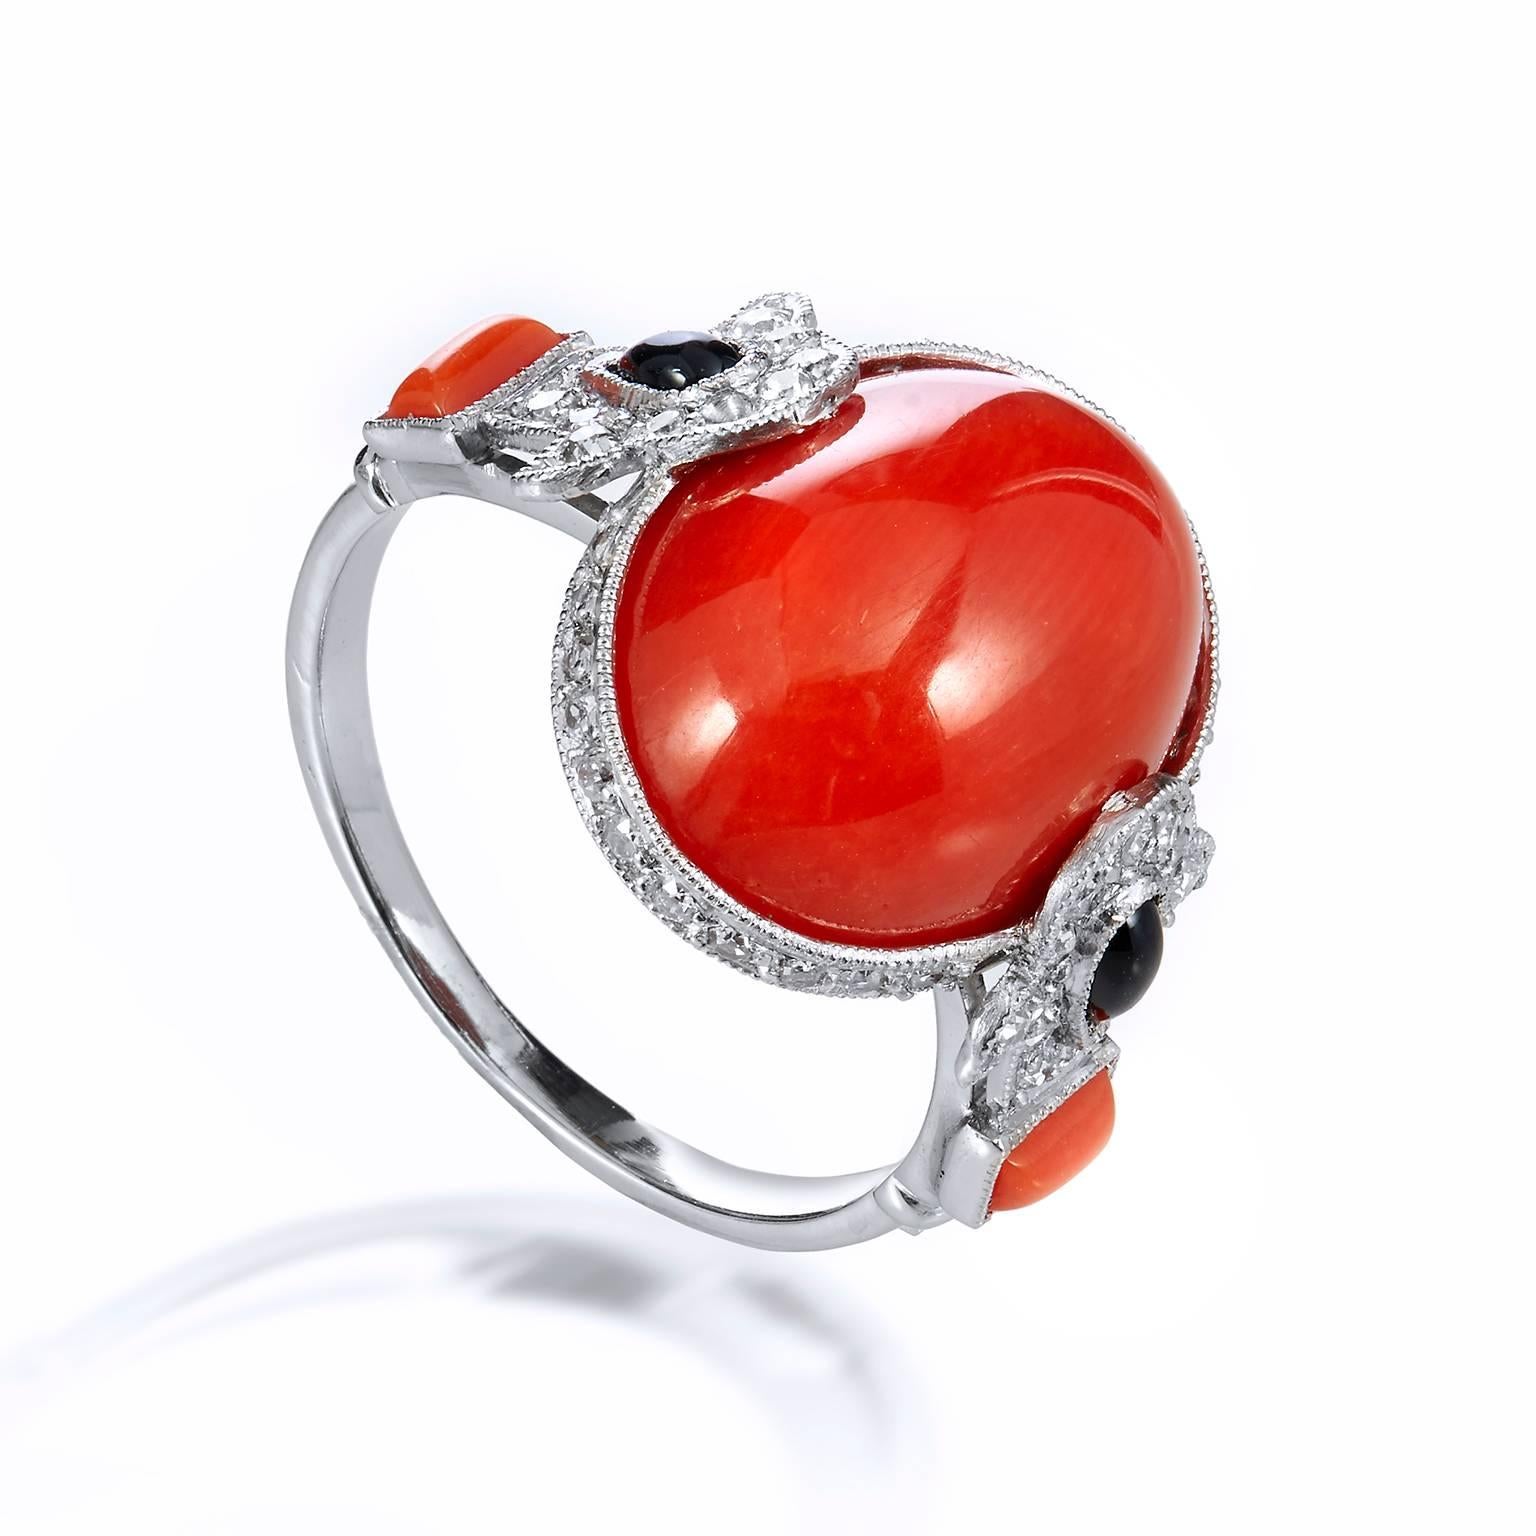 Women's Art Deco Inspired 8.20 Carat Red Coral with Onyx Diamonds Platinum Ring 7